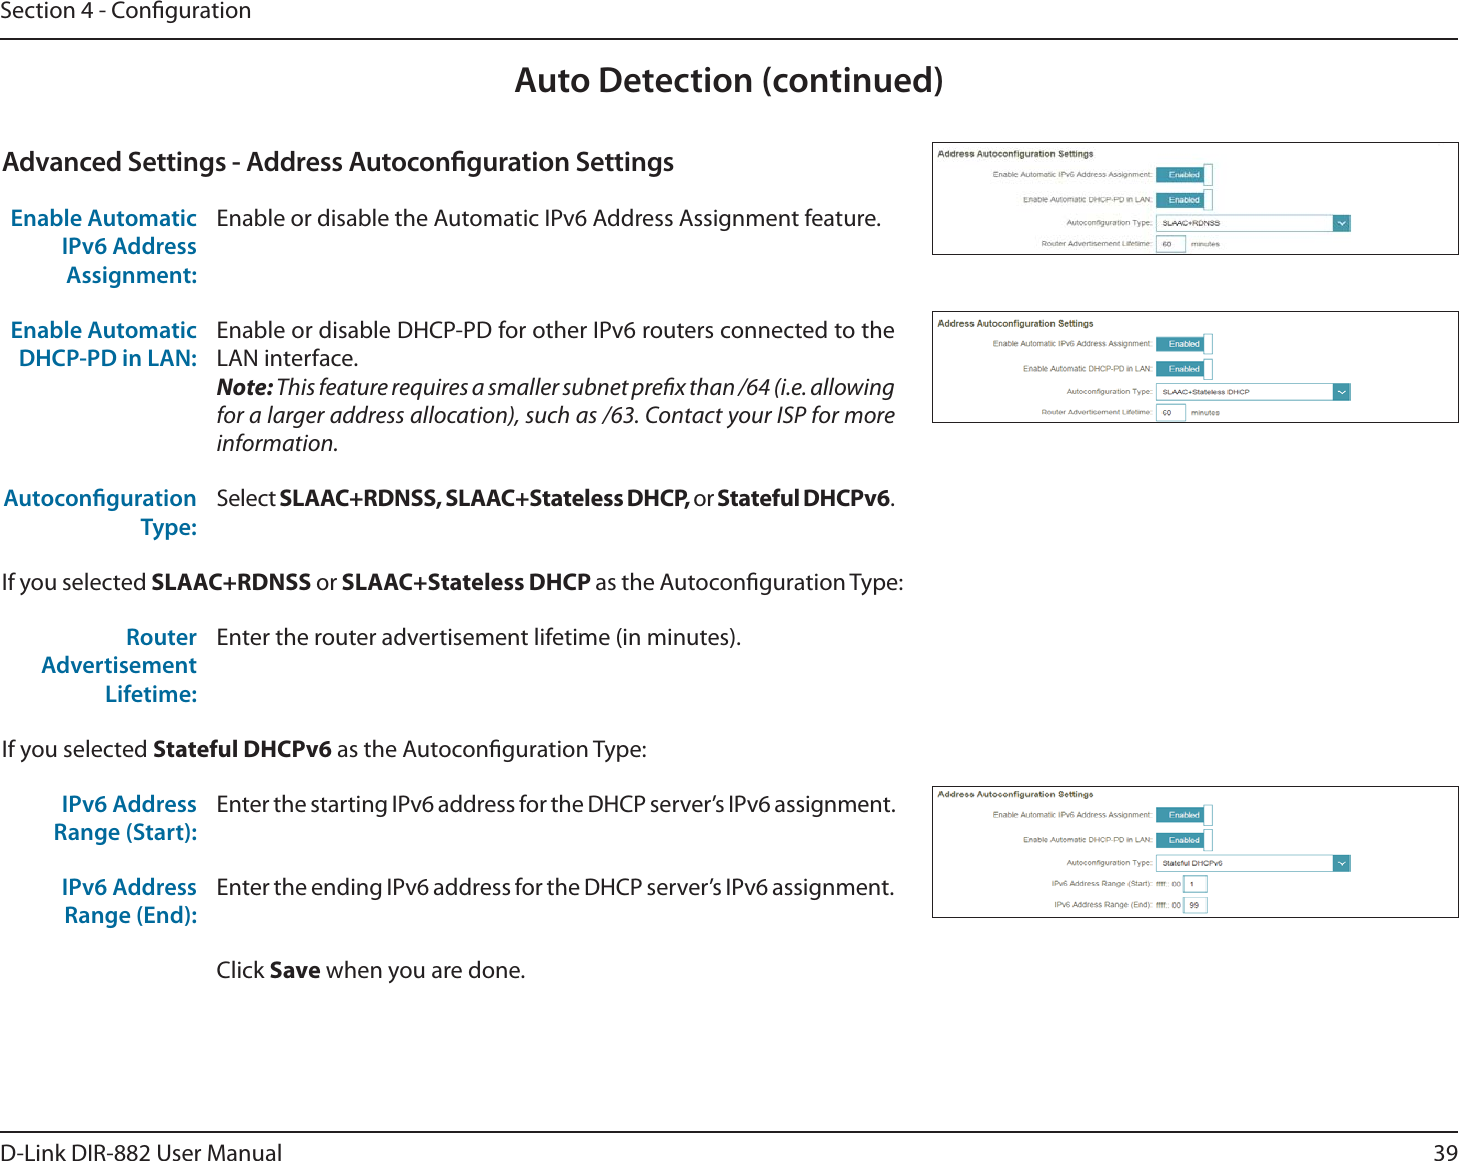 39D-Link DIR-882 User ManualSection 4 - CongurationAuto Detection (continued)Advanced Settings - Address Autoconguration SettingsEnable Automatic IPv6 Address Assignment:Enable or disable the Automatic IPv6 Address Assignment feature.Enable Automatic DHCP-PD in LAN:Enable or disable DHCP-PD for other IPv6 routers connected to the LAN interface.Note: This feature requires a smaller subnet prex than /64 (i.e. allowing for a larger address allocation), such as /63. Contact your ISP for more information.Autoconguration Type:Select 4-&quot;&quot;$3%/444-&quot;&quot;$4UBUFMFTT%)$1or Stateful DHCPv6.If you selected 4-&quot;&quot;$3%/44 or4-&quot;&quot;$4UBUFMFTT%)$1as the Autoconguration Type:Router Advertisement Lifetime:Enter the router advertisement lifetime (in minutes).If you selected Stateful DHCPv6 as the Autoconguration Type:IPv6 Address Range (Start):Enter the starting IPv6 address for the DHCP server’s IPv6 assignment.IPv6 Address Range (End):Enter the ending IPv6 address for the DHCP server’s IPv6 assignment.Click Save when you are done.